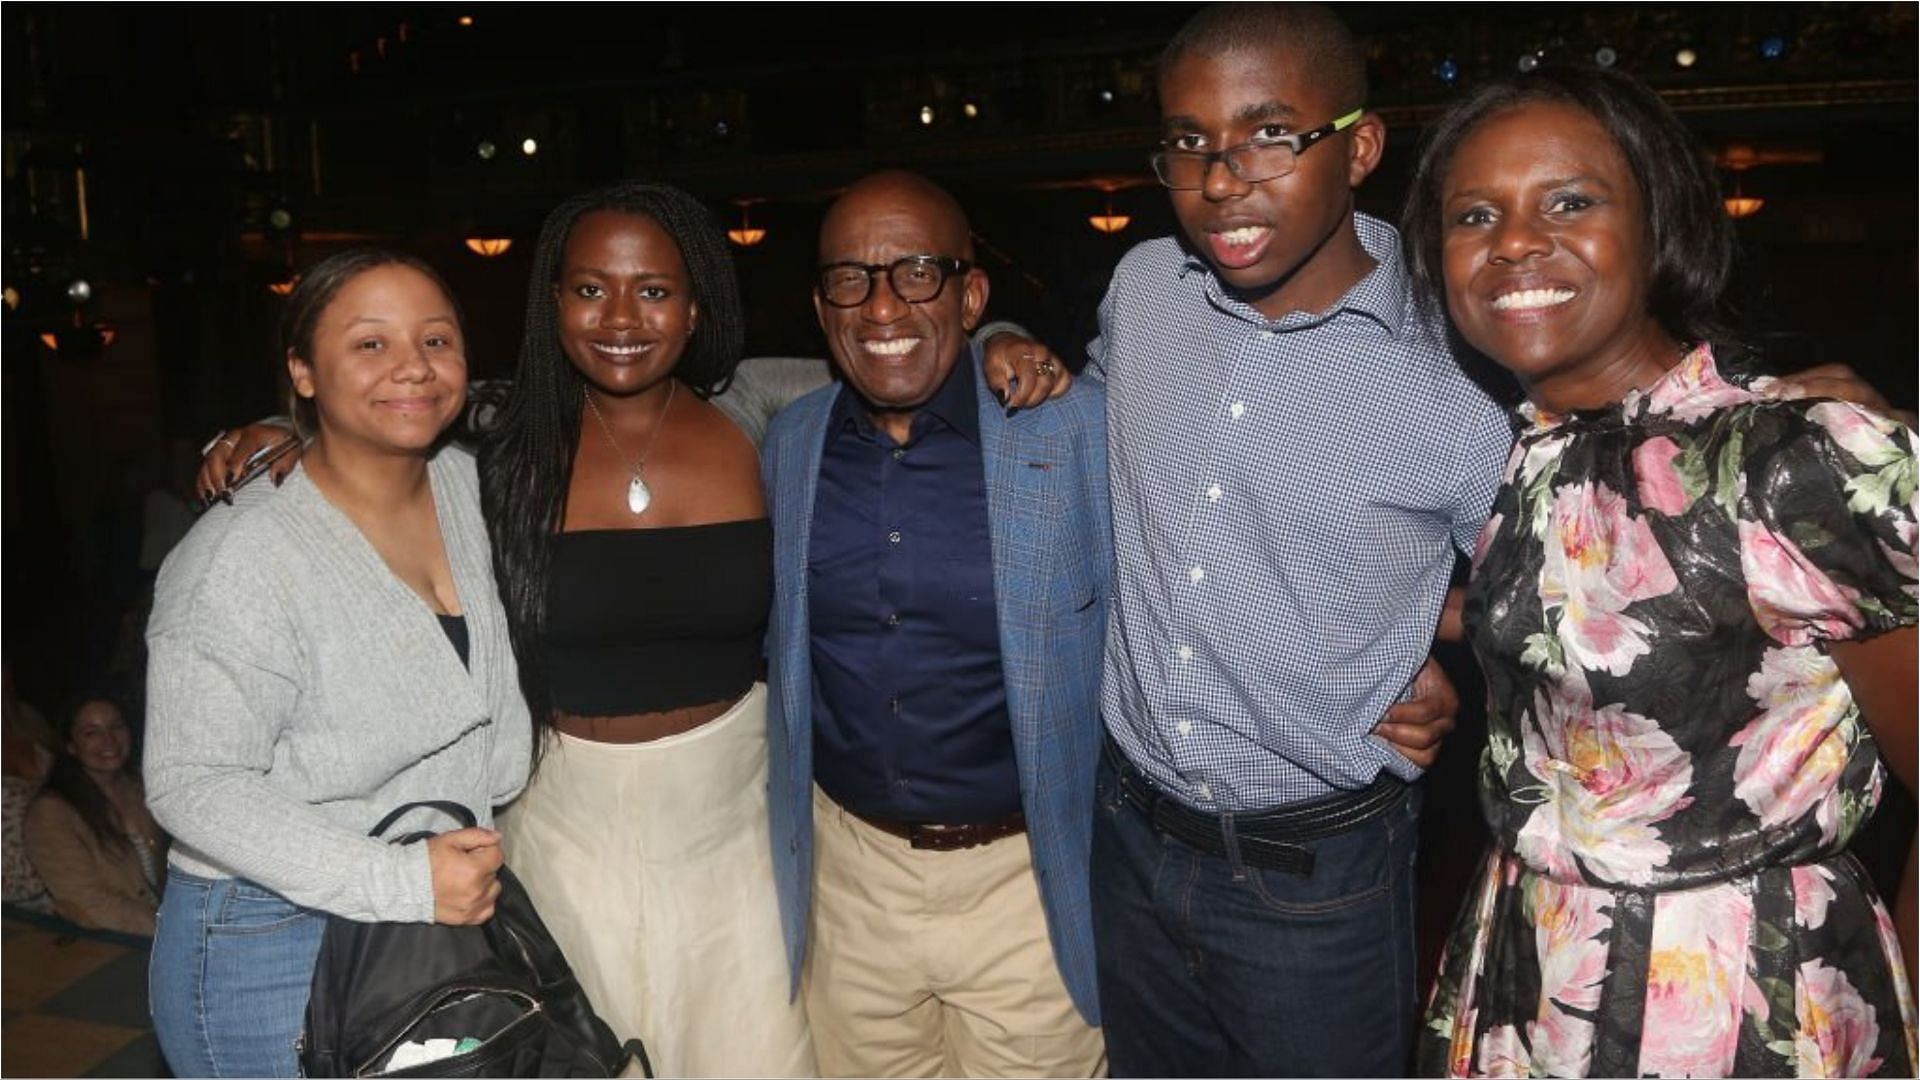 Al Roker with his family members (Image via Bruce Glikas/Getty Images)